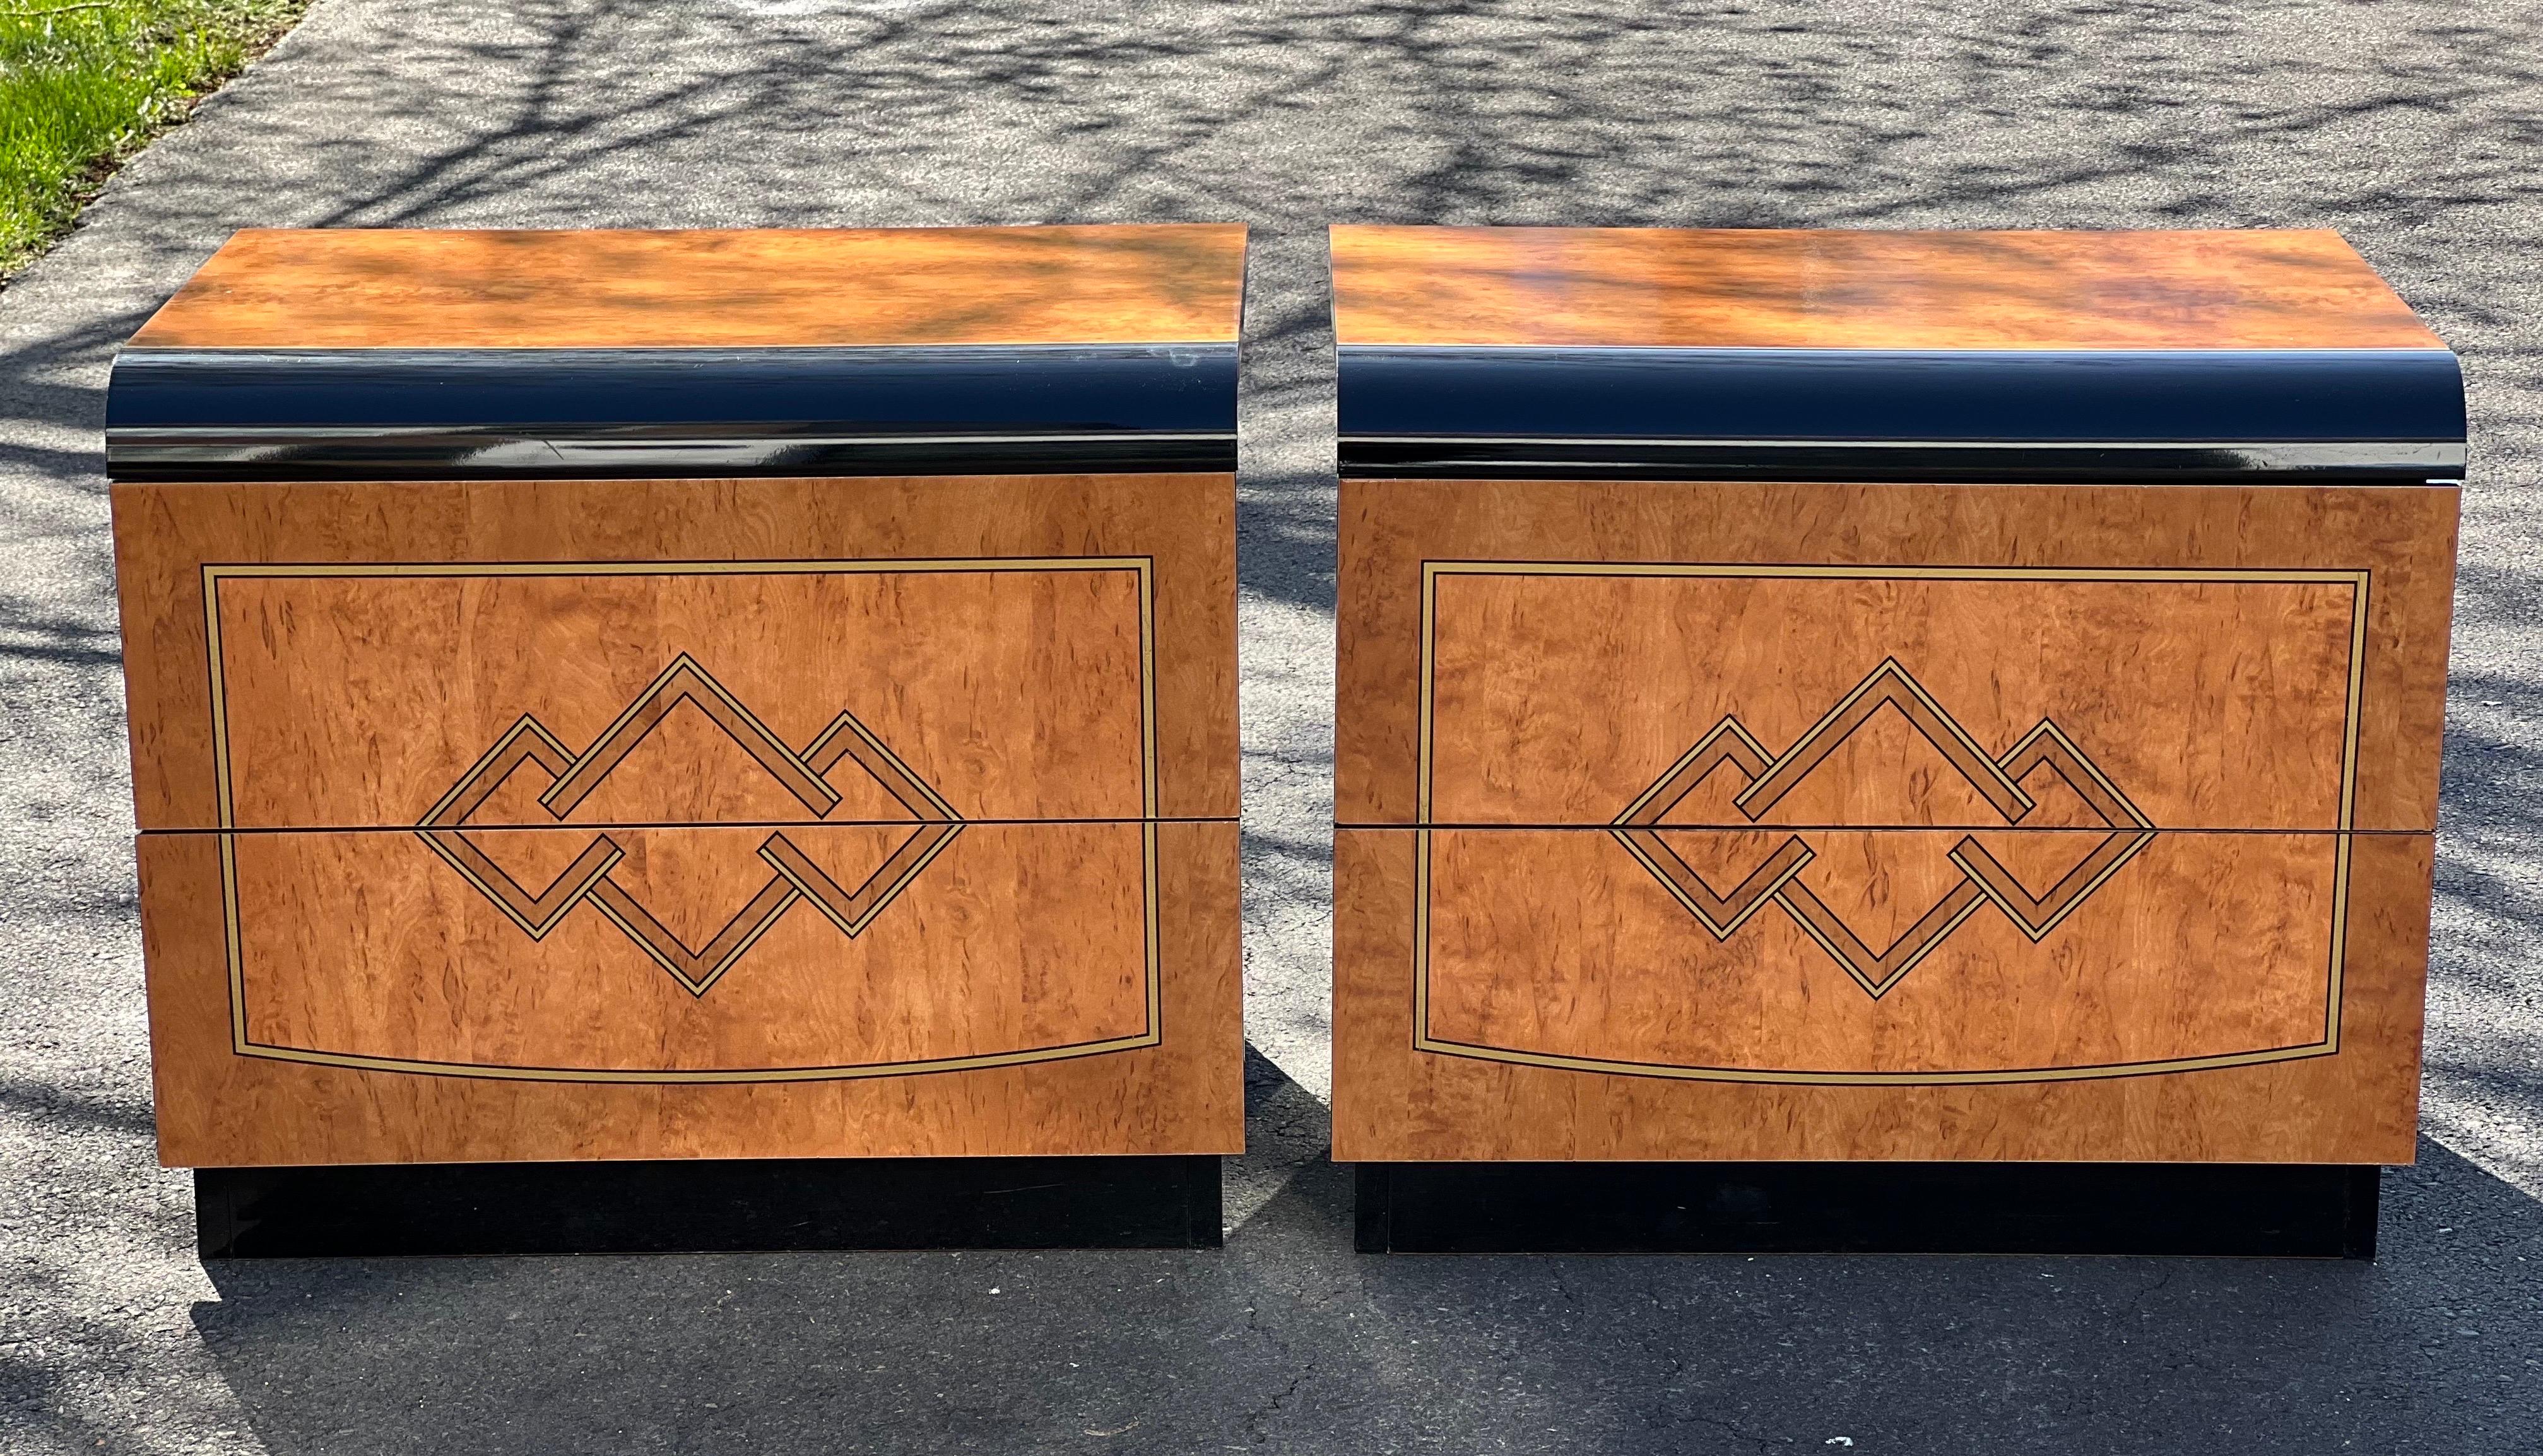 Elegant Italian nightstands with burl wood laminate. Finish is a high gloss with beautiful Hollywood Regency inspired pyramid motif design. The sides and plinth bases are ebonized laminate. Fronts are waterfall style. Clean pair with little use